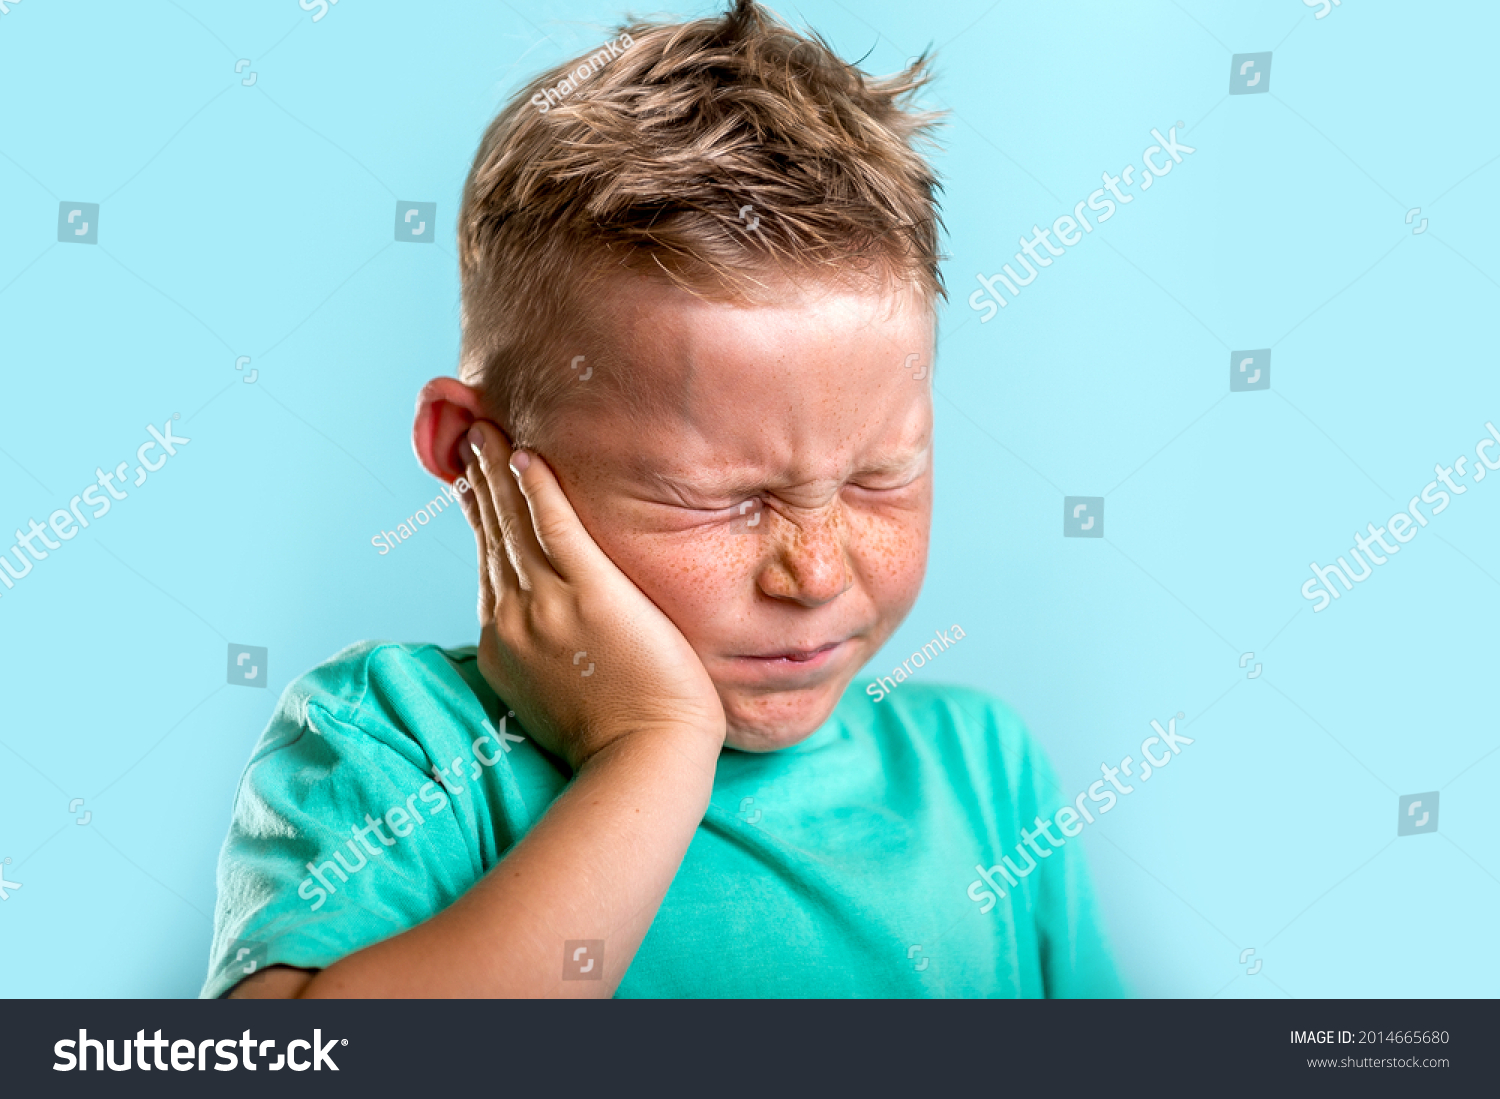 Child has earache. School boy has sore ear. Little kid covered ear with hand and closed eyes. Kid suffering from otitis. Vaccination for being health. Toothache. #2014665680